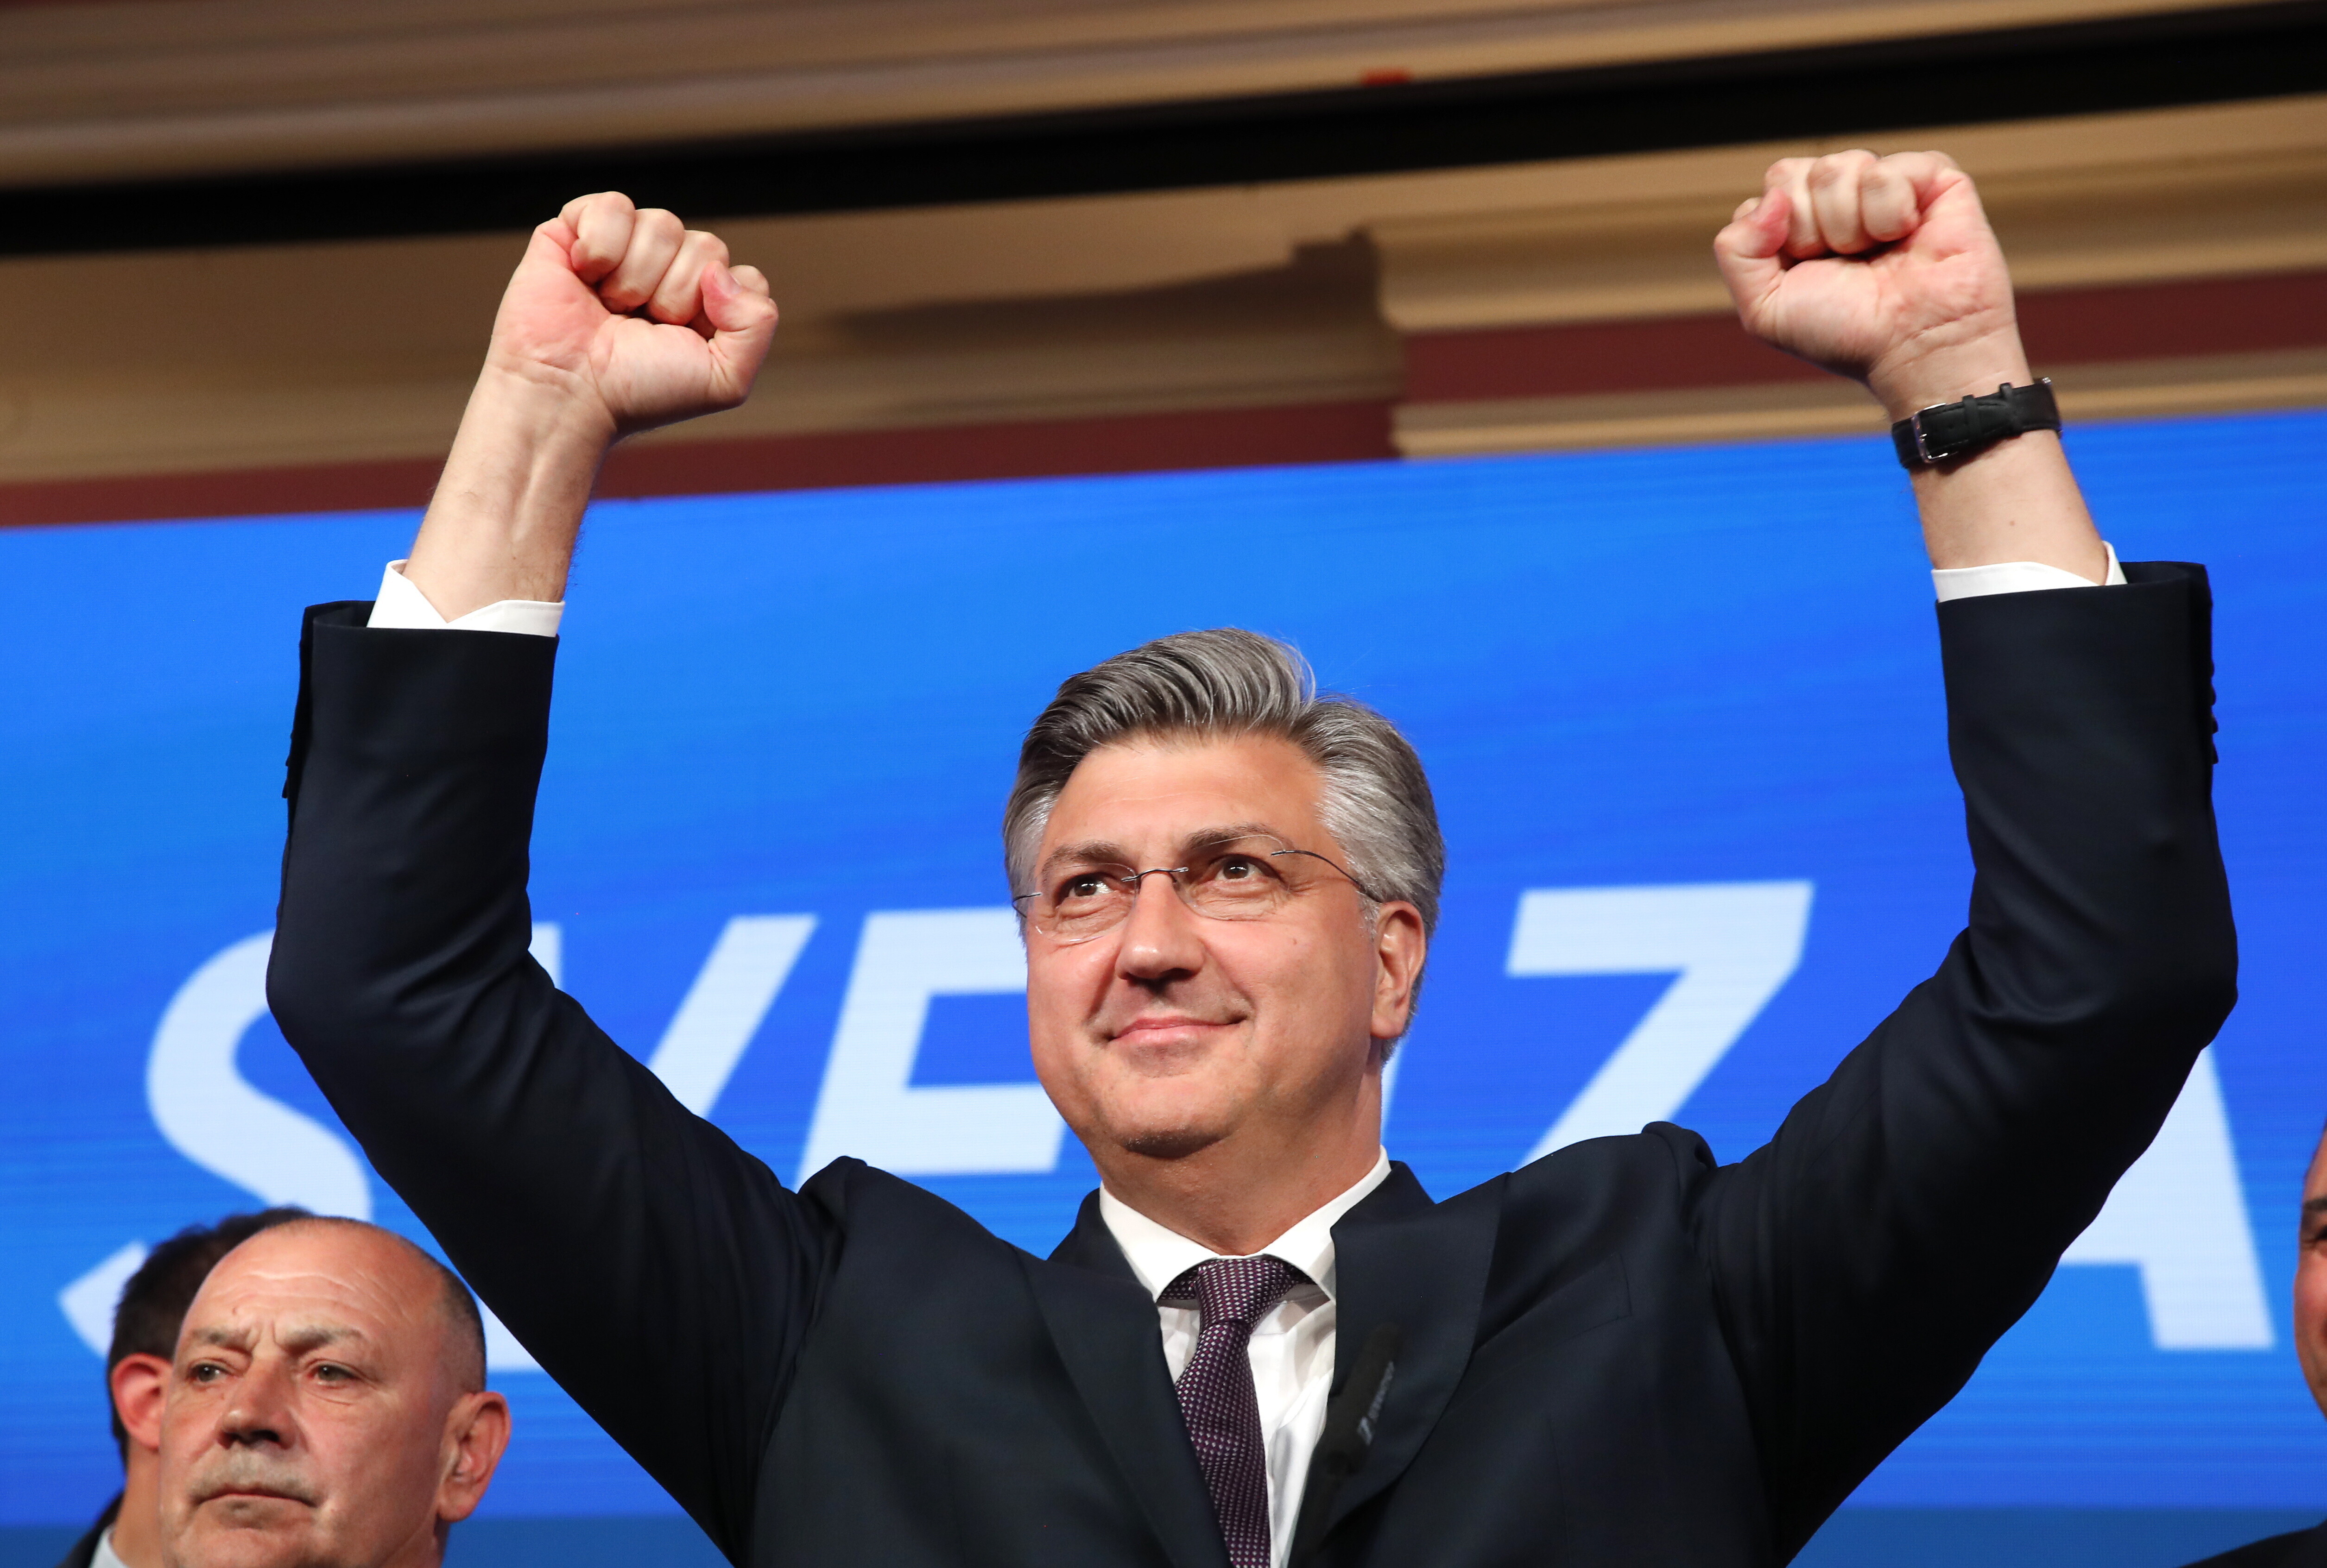 Elections in Croatia: A political shift to the right